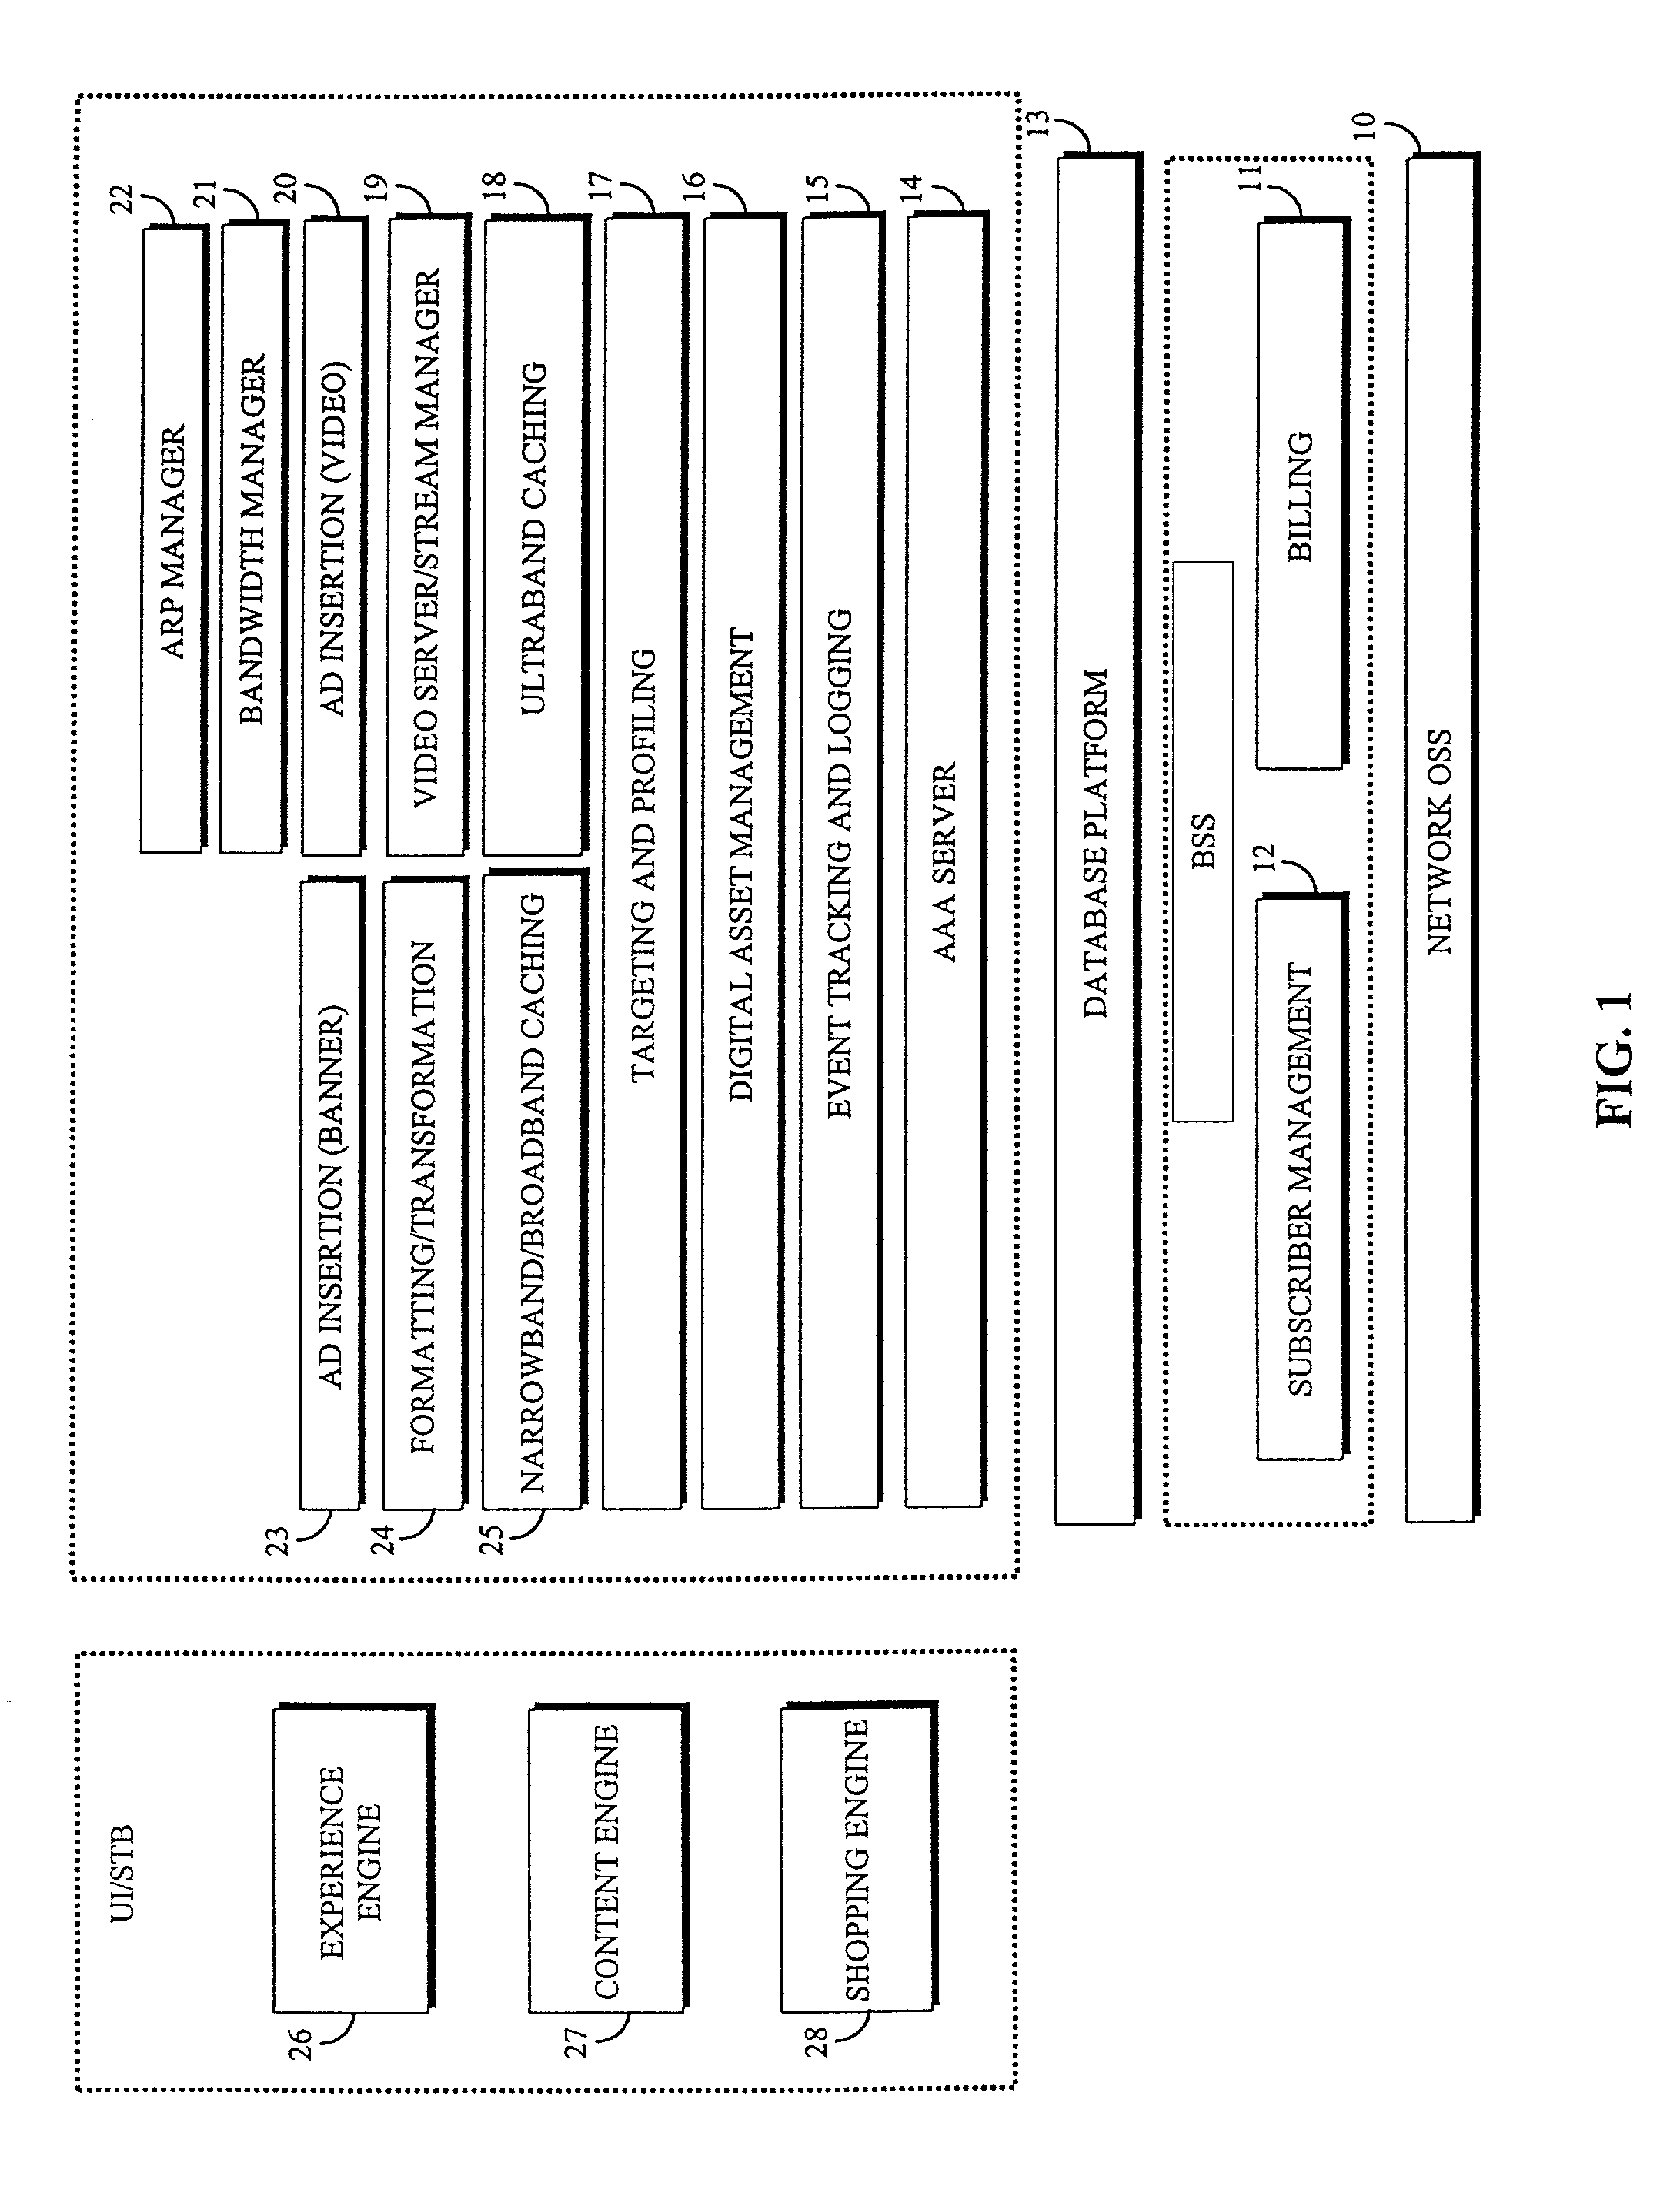 Method and apparatus for management and delivery of electronic content to end users